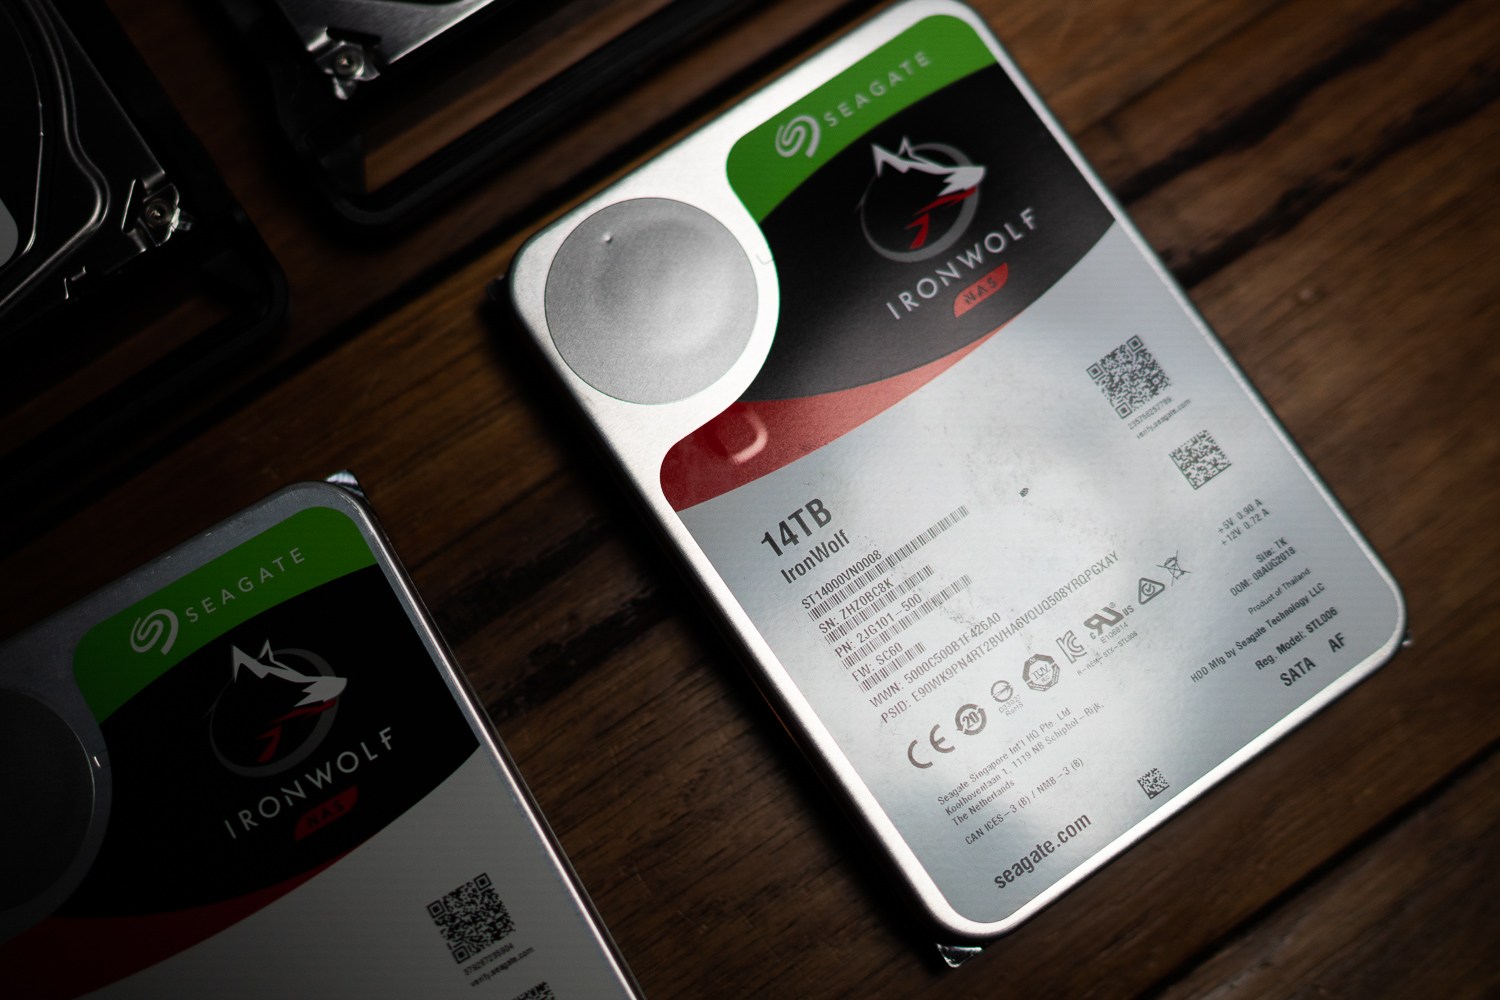 Review: Seagate 14tb Ironwolf Disks for all of Your Photographs